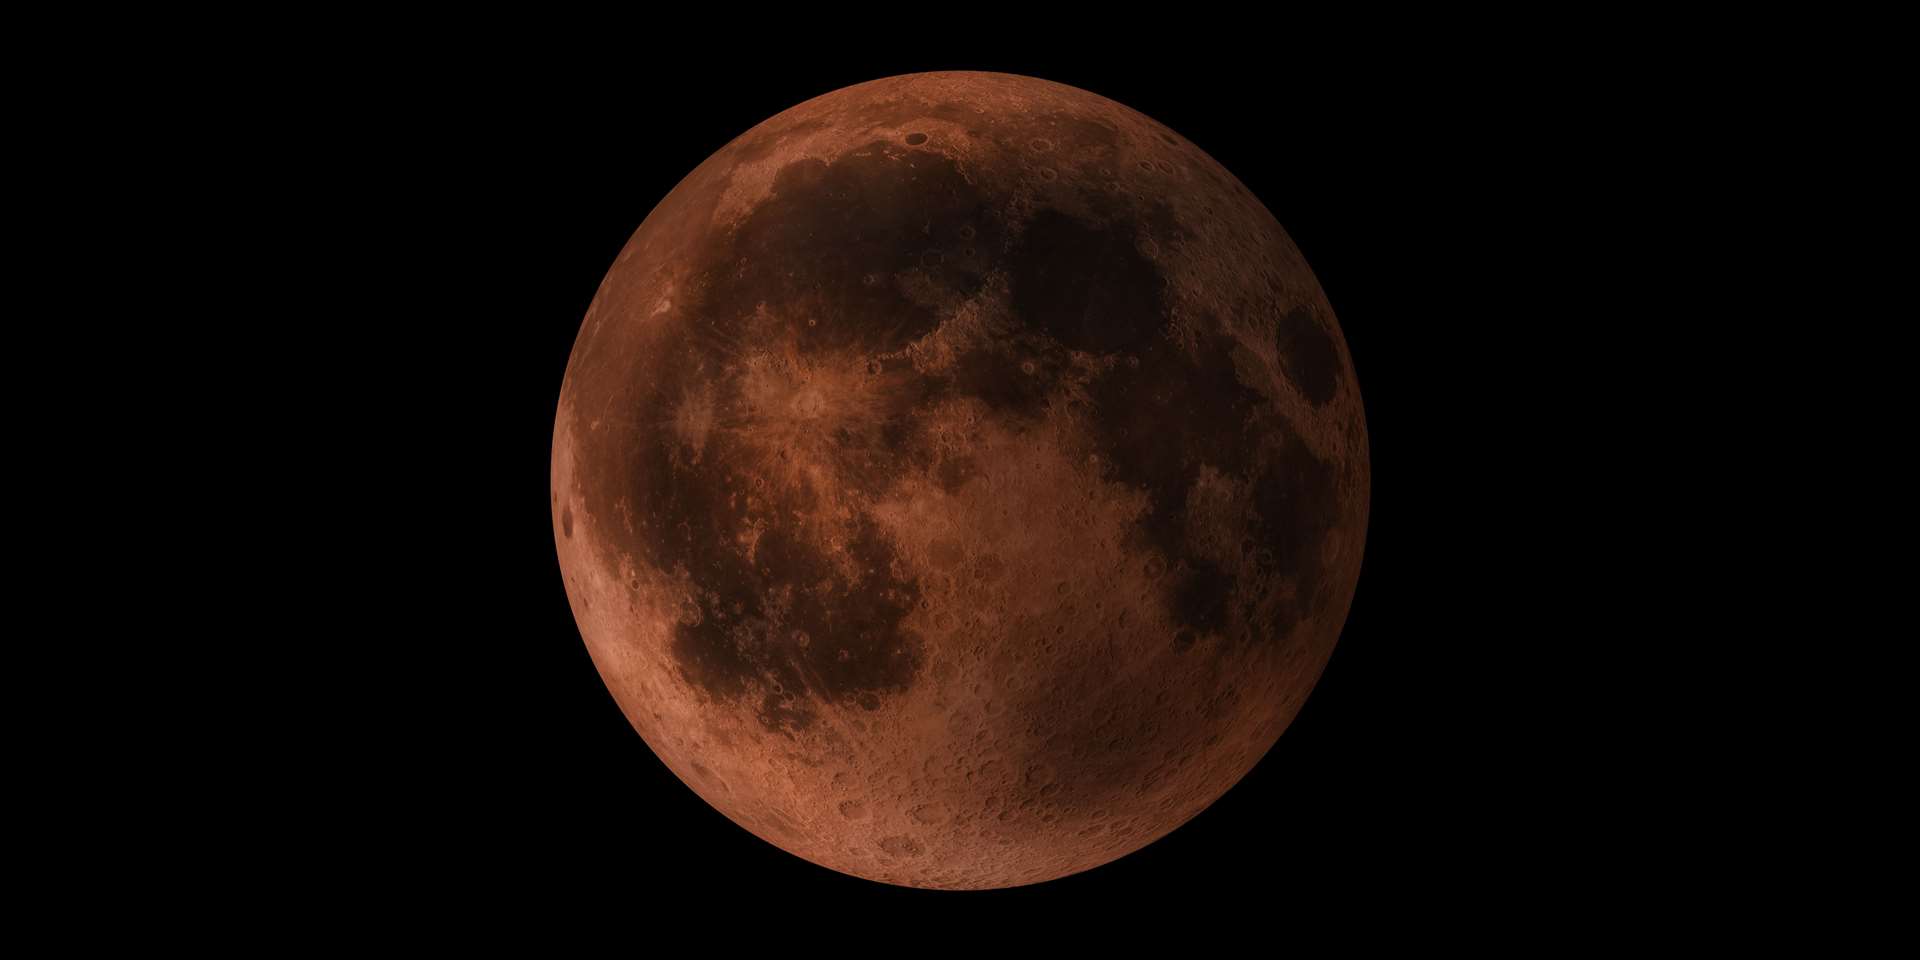 The 'blood Moon' is something which can be spotted relatively frequently